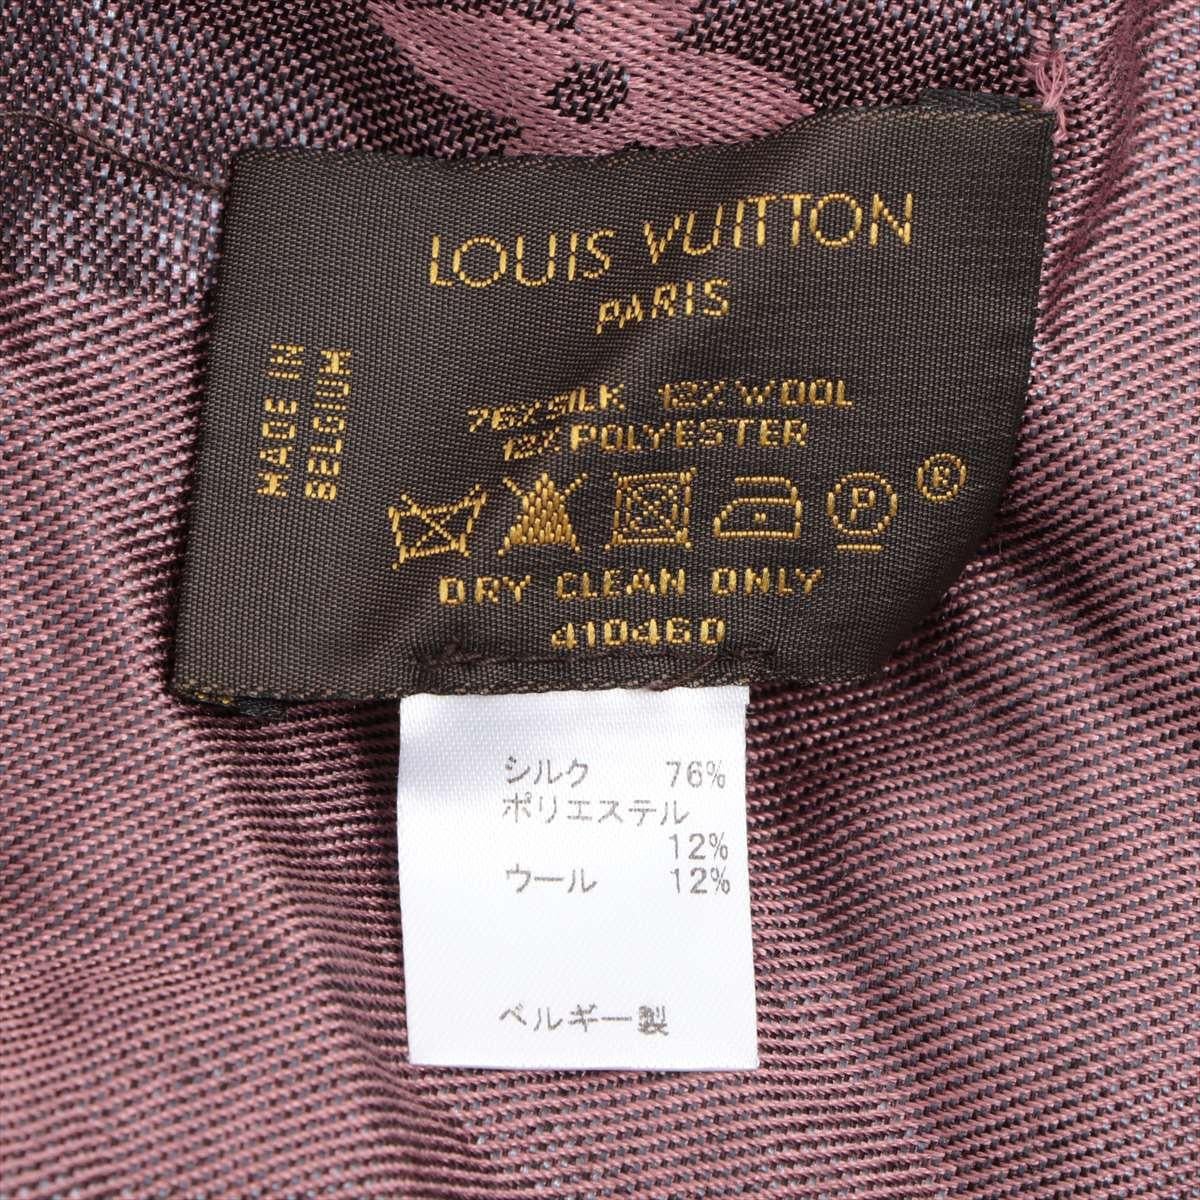 Louis Vuitton So Shine Monogram Shawl Purple In Good Condition For Sale In Indianapolis, IN